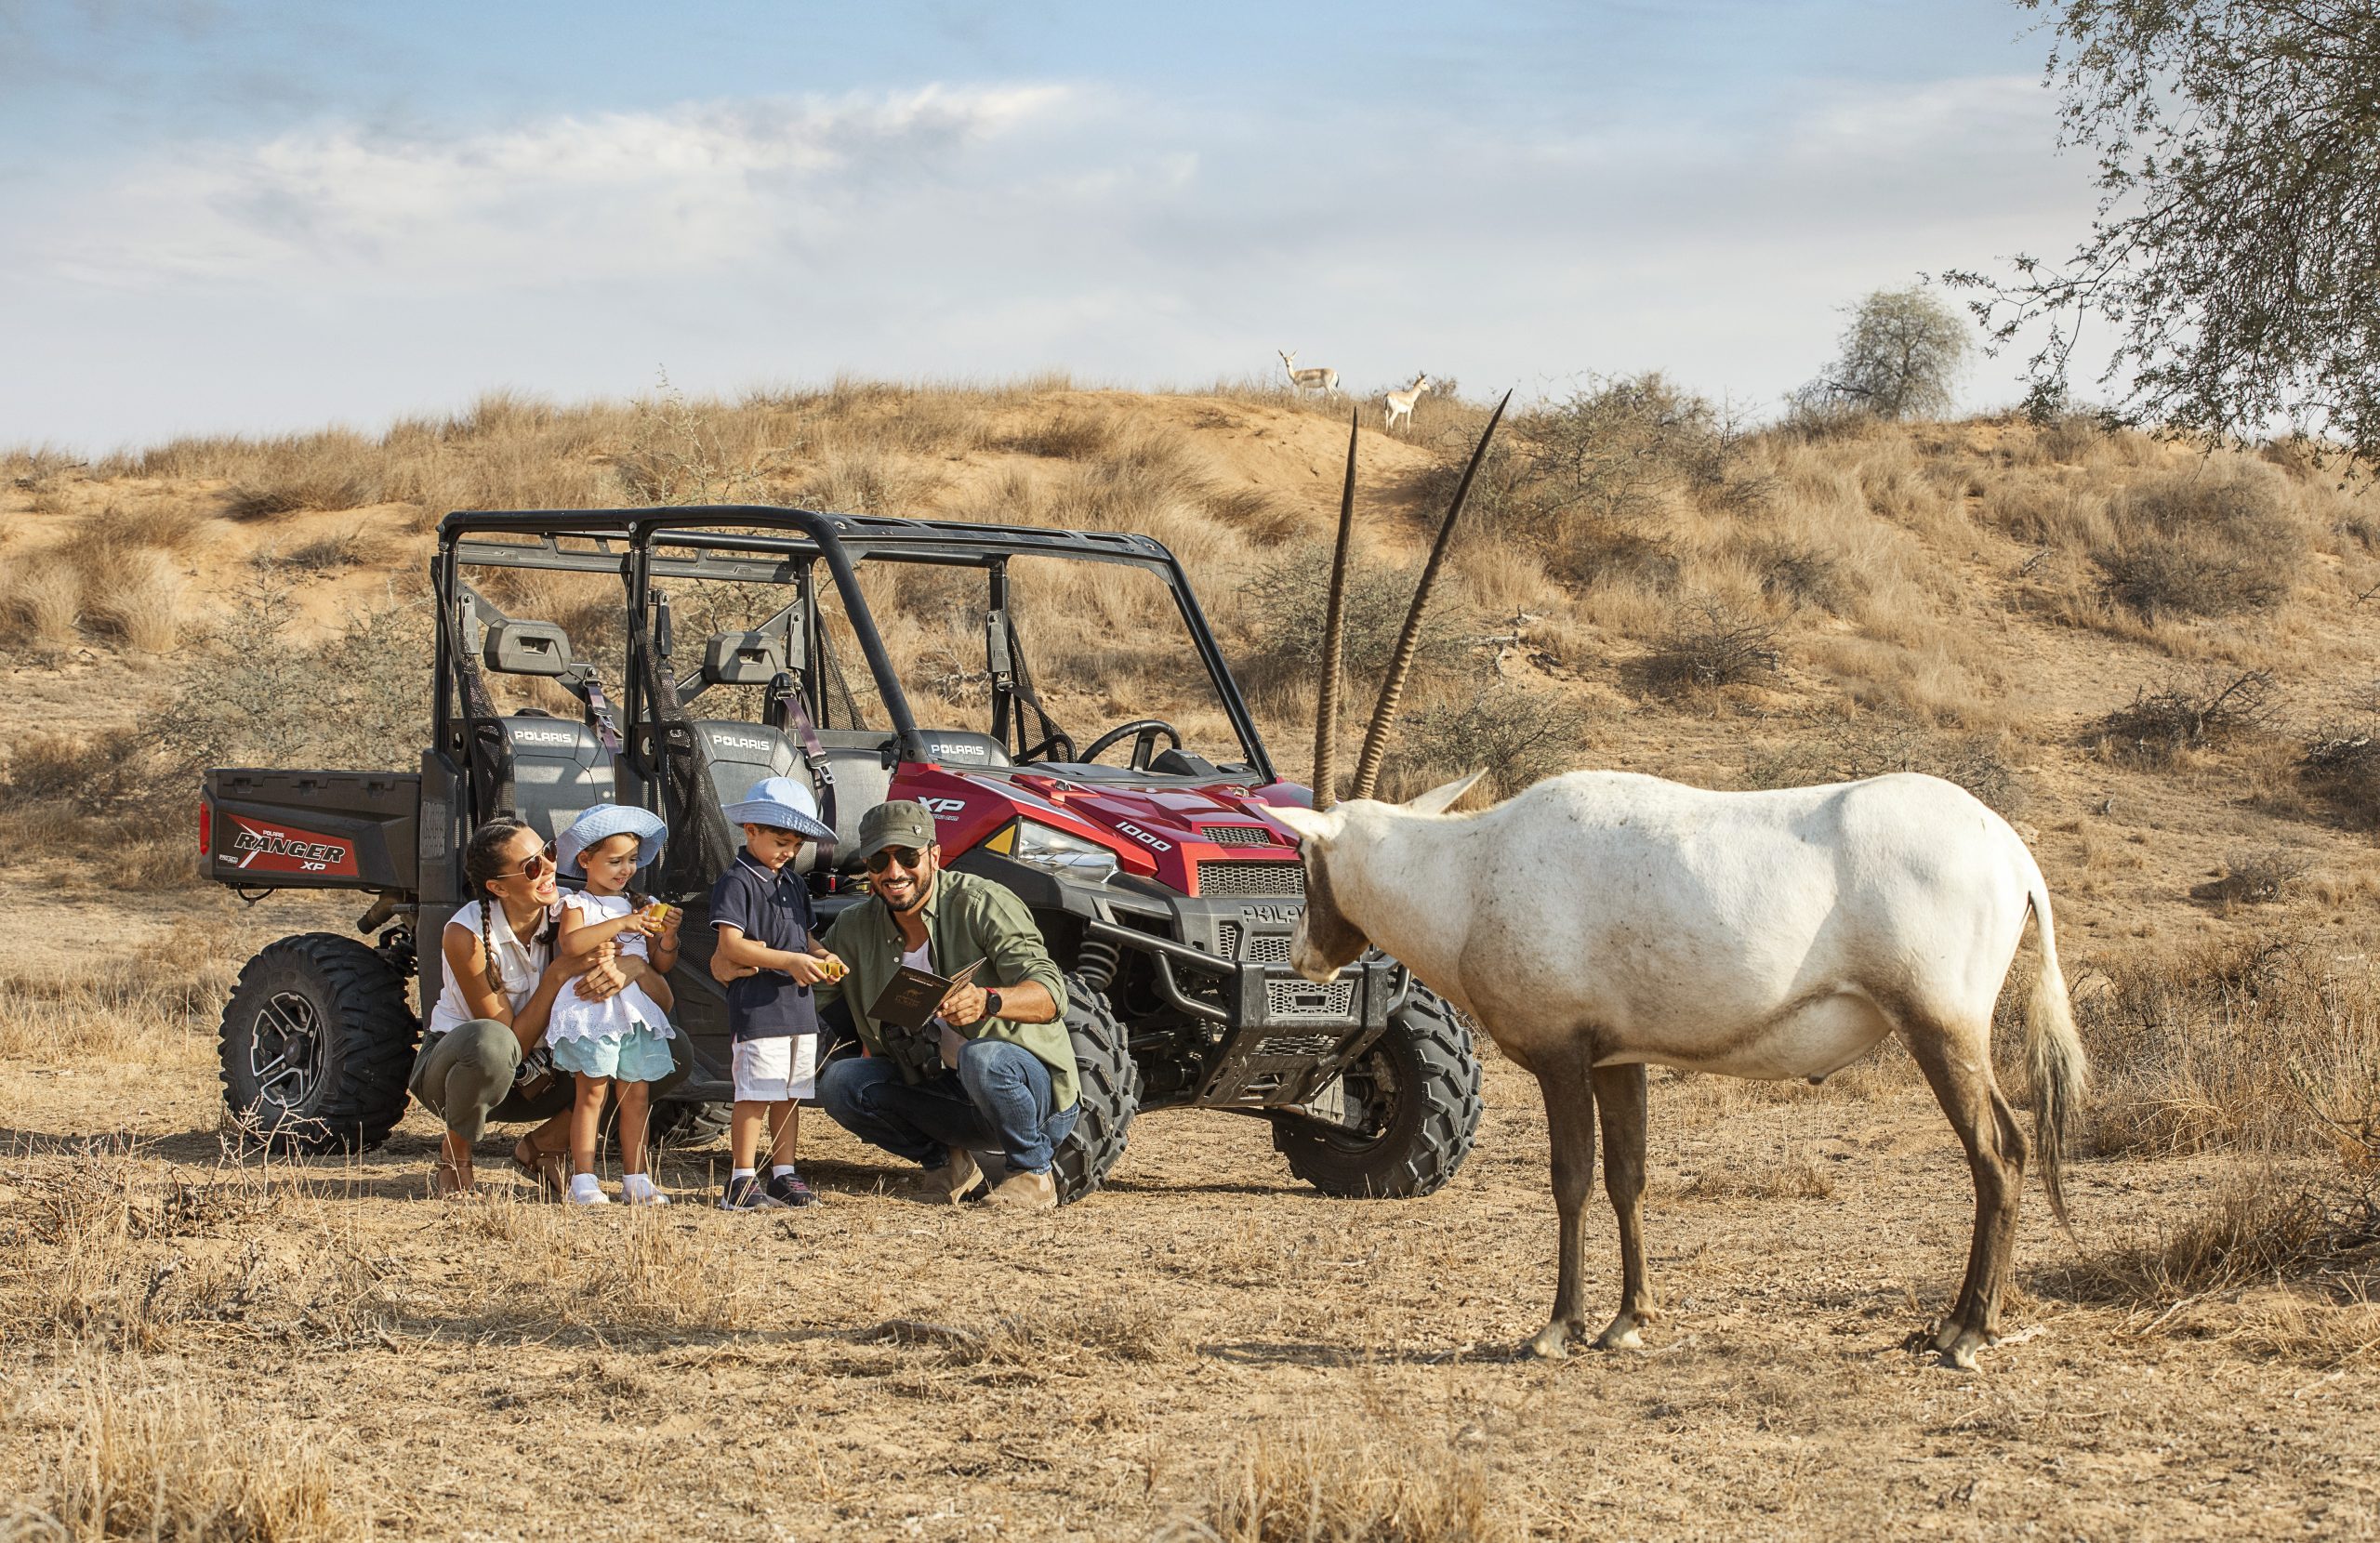 On safari, a family of four admire a gazelle in the Al Wadi Desert while huddling close to their jeep.